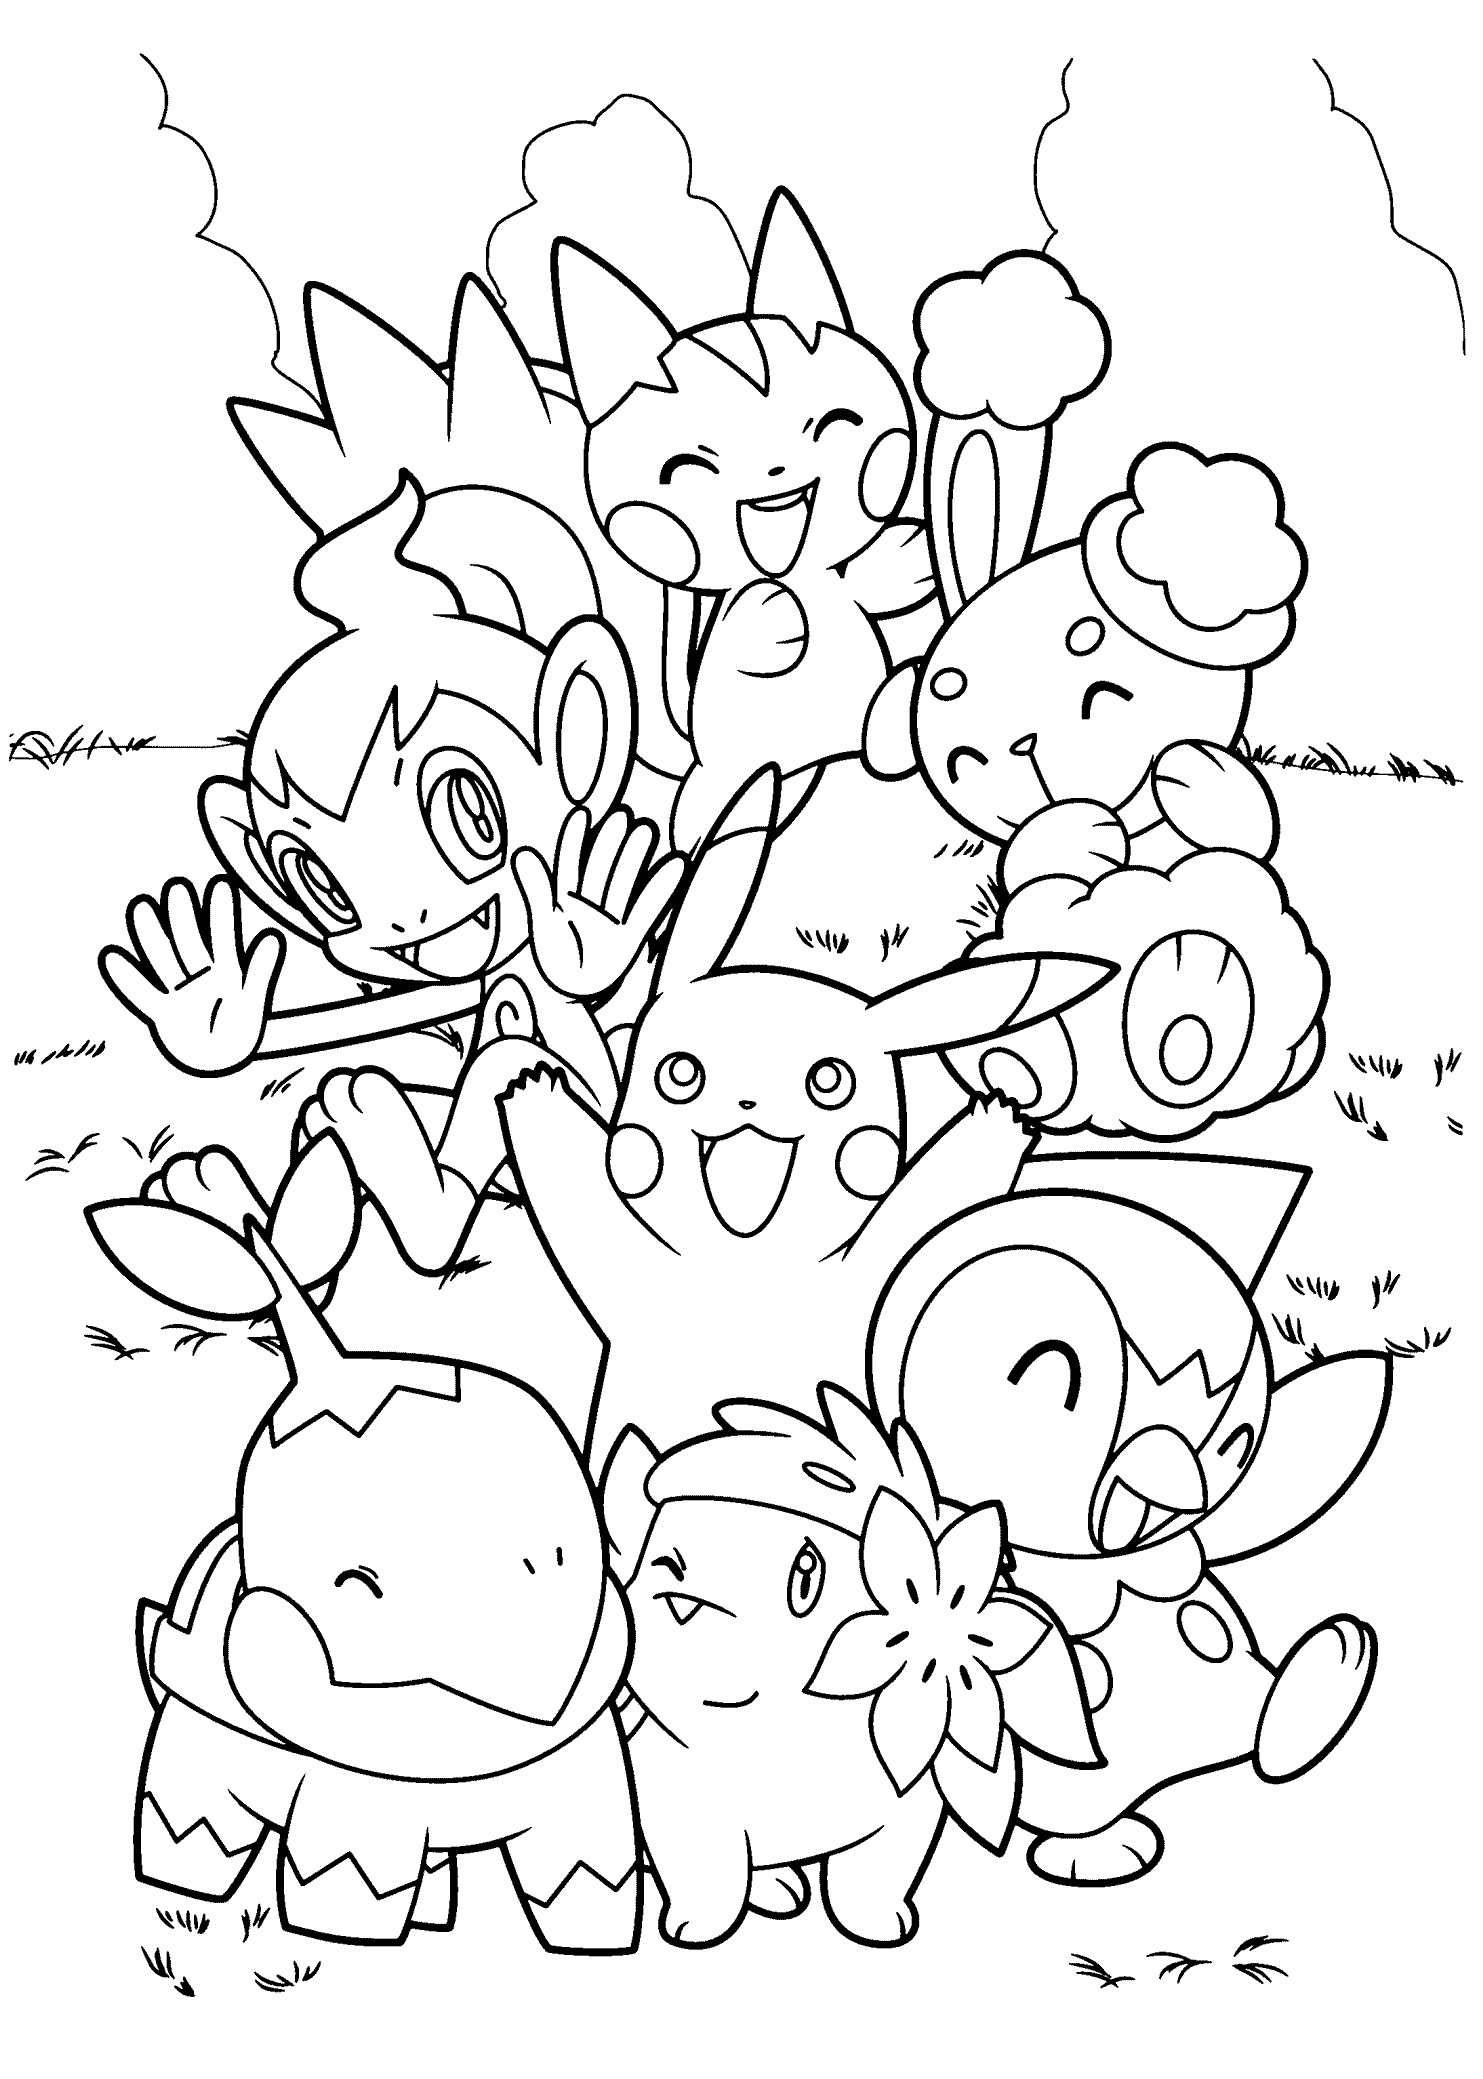 Pokemon Coloring Book for Adults Wallpaper